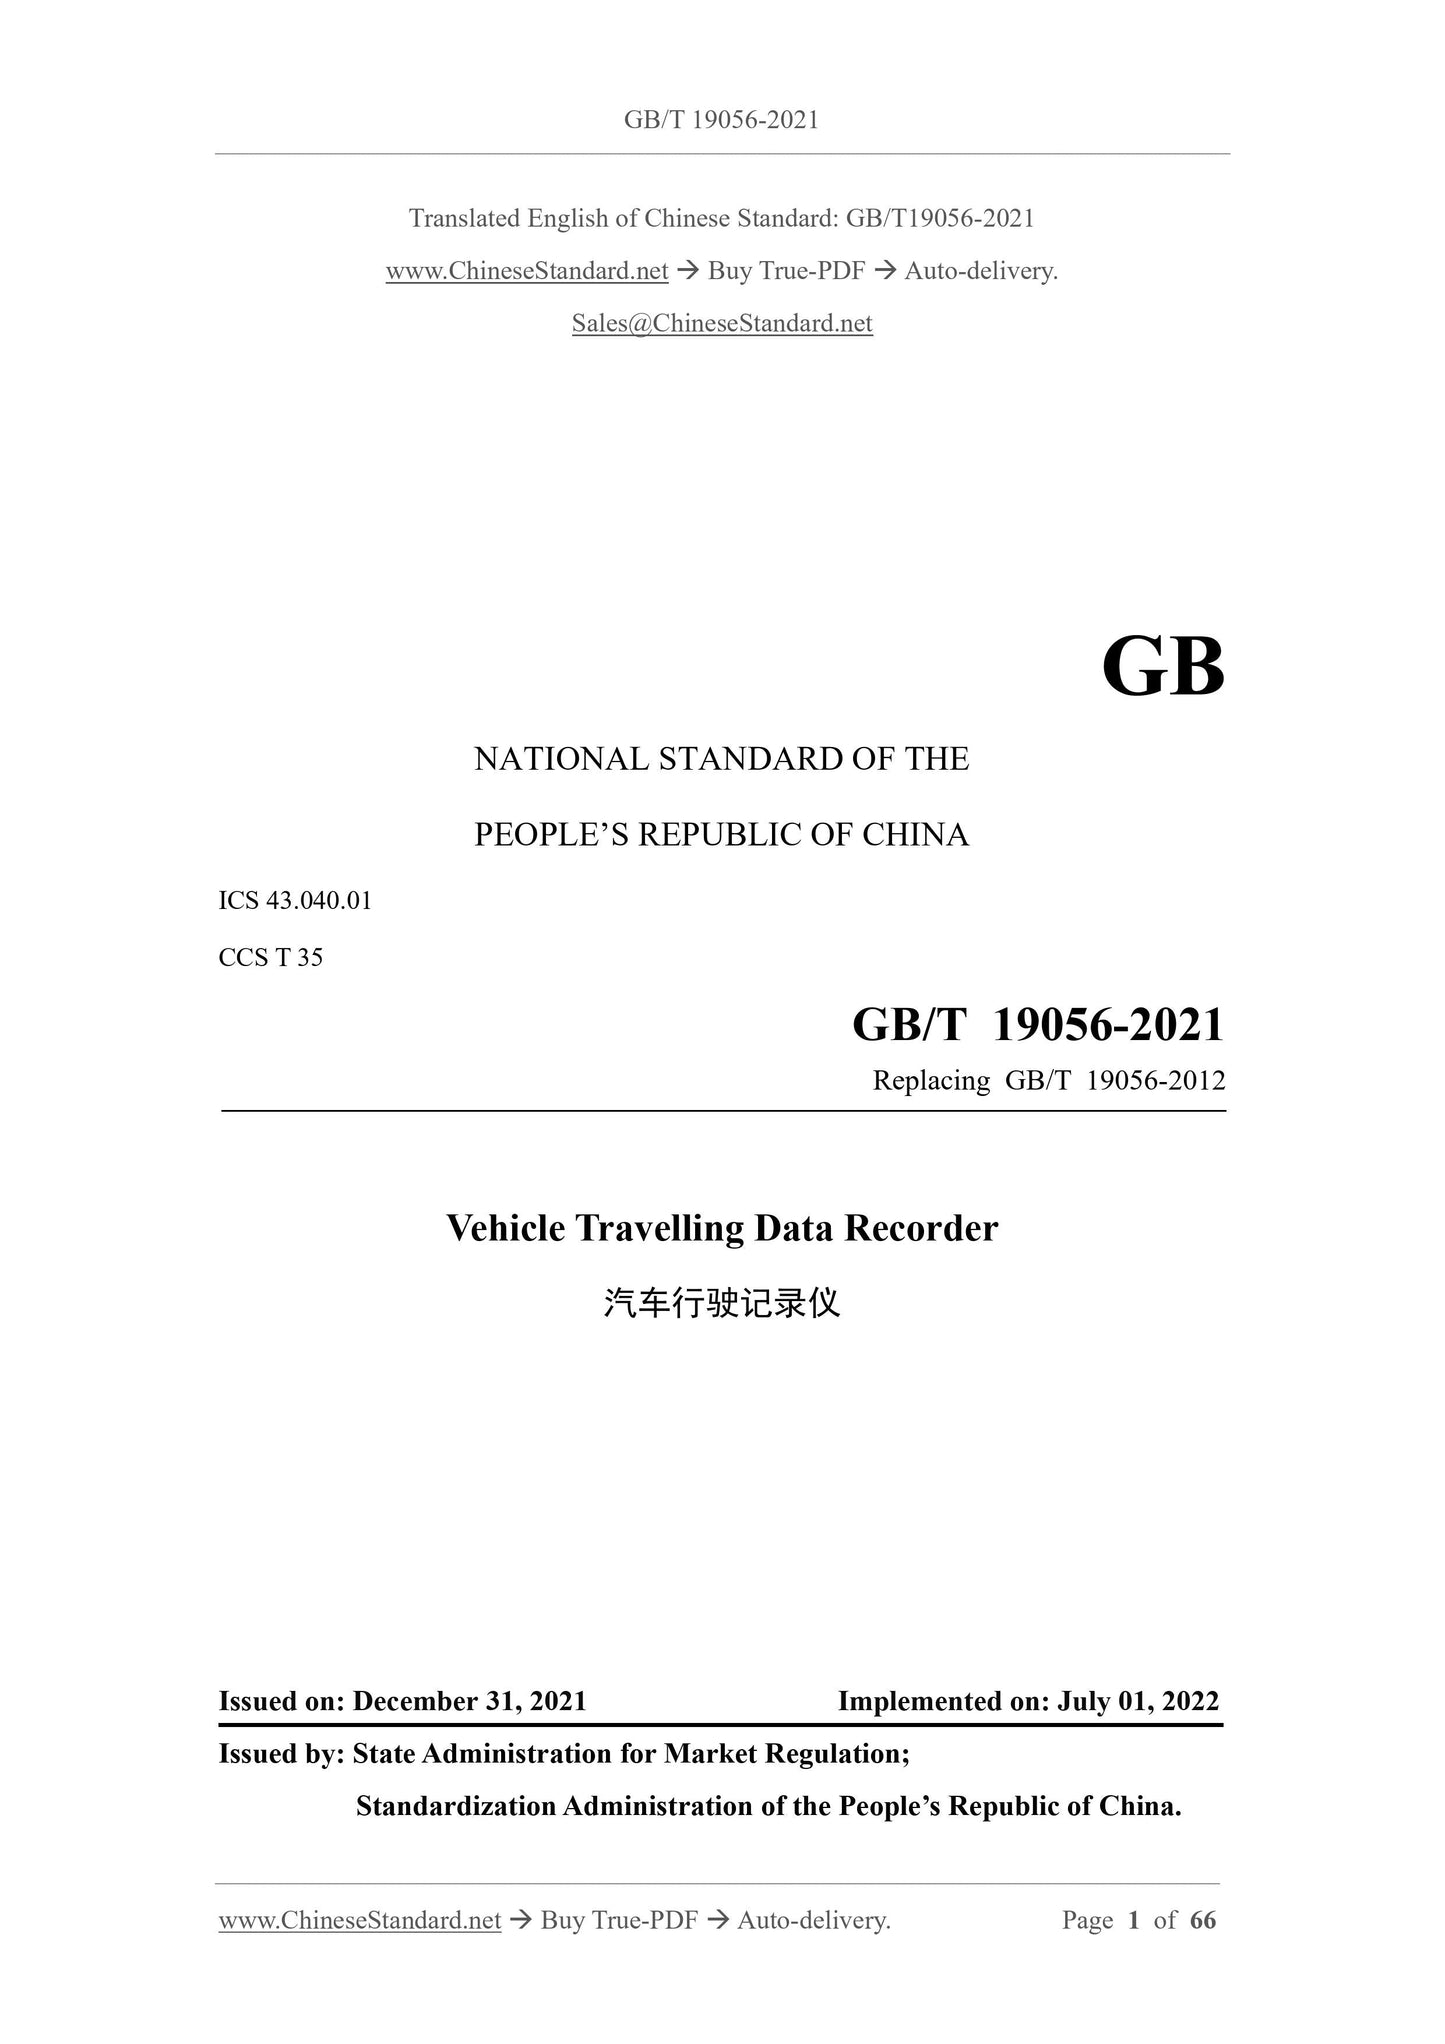 GB/T 19056-2021 Page 1